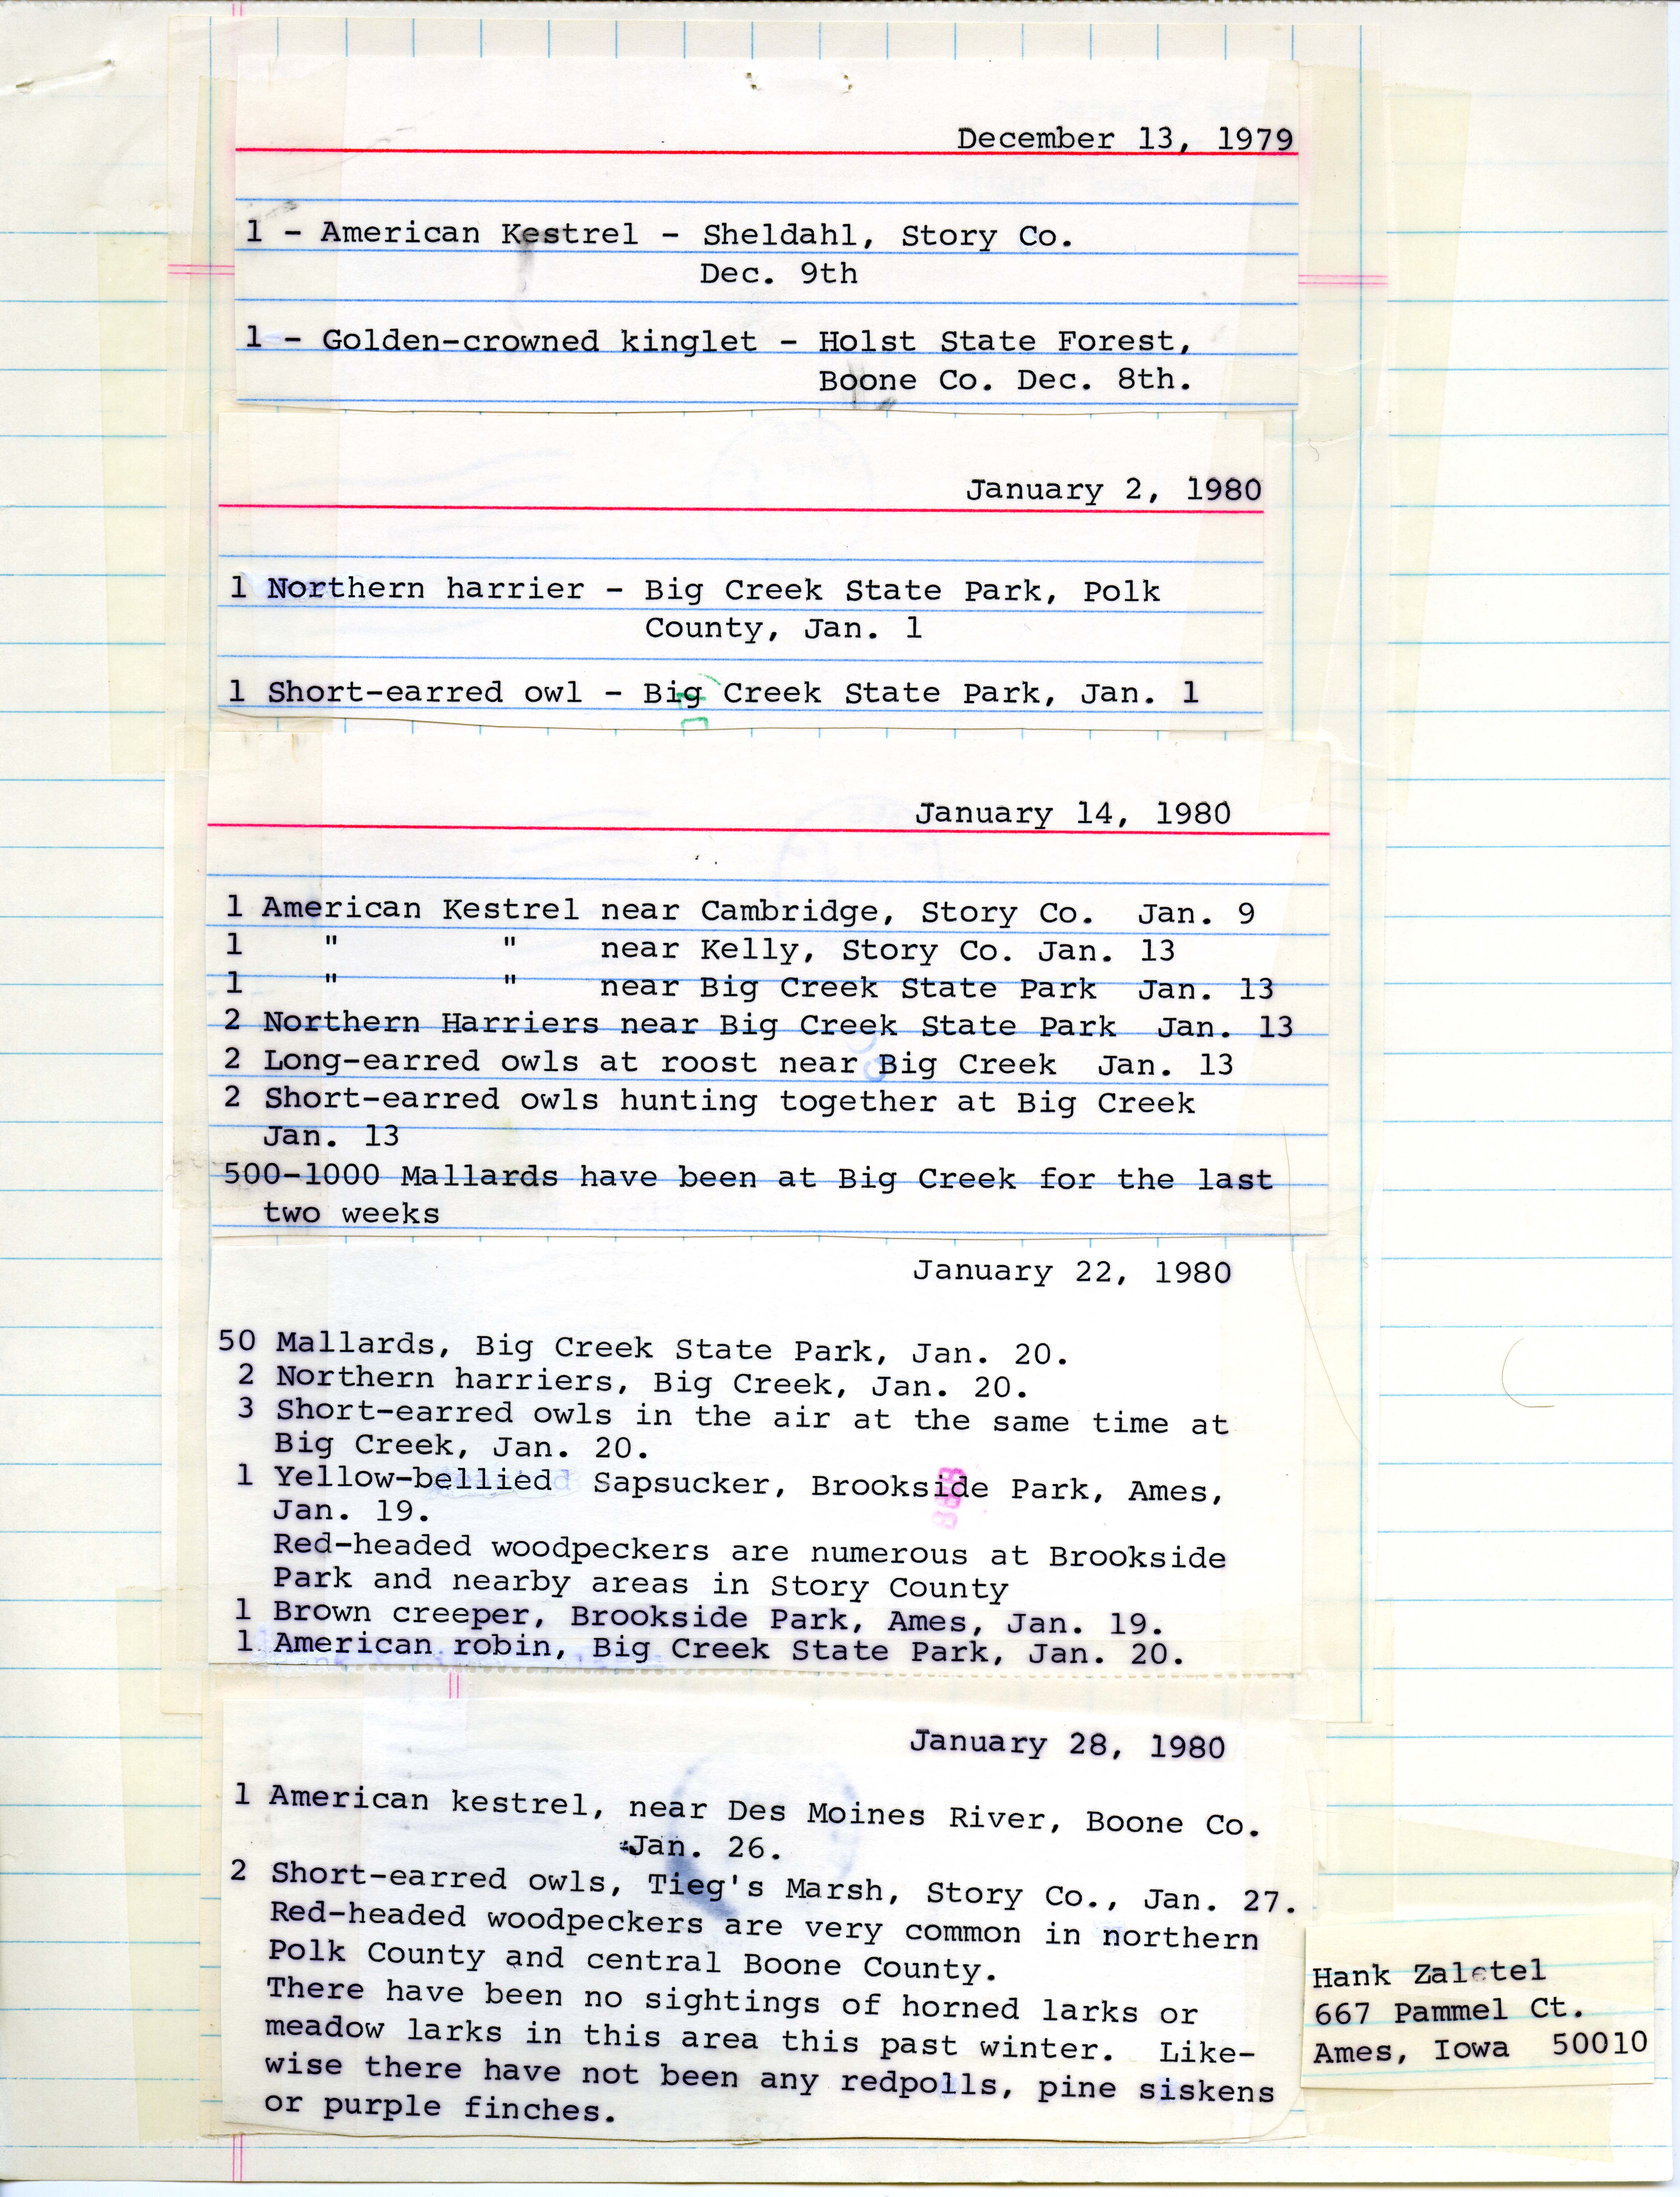 Field notes contributed by Hank  and Linda Zaletel, winter 1979-1980